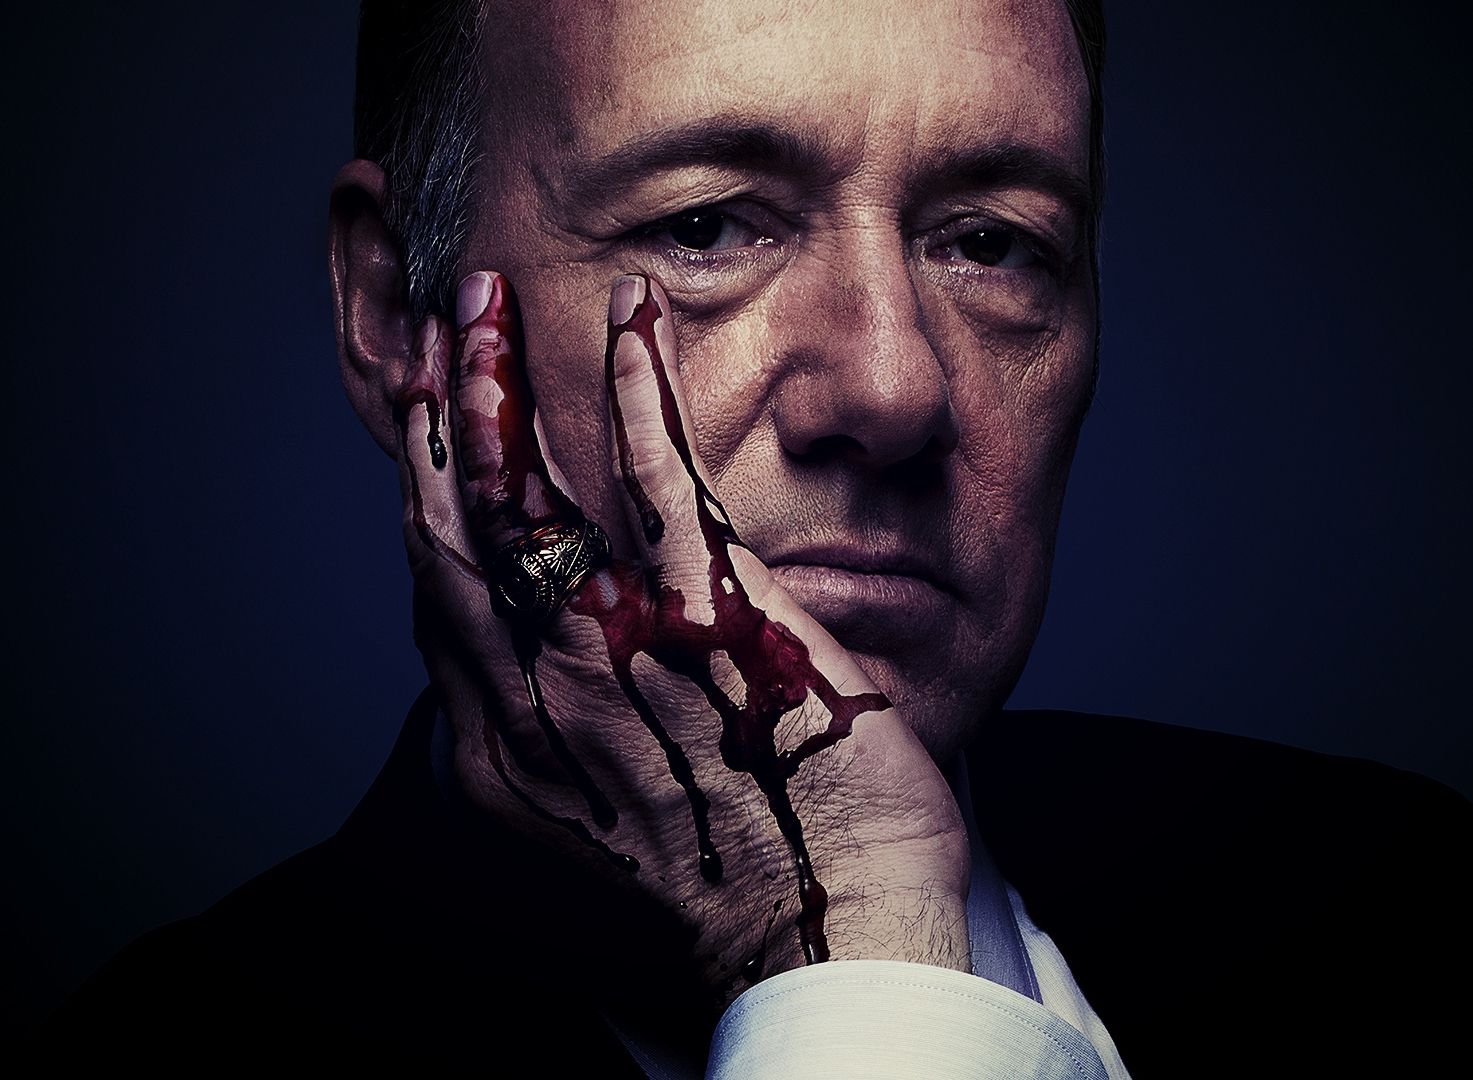 netflix s house of cards renewed for third season ahead of second season s premiere image 1